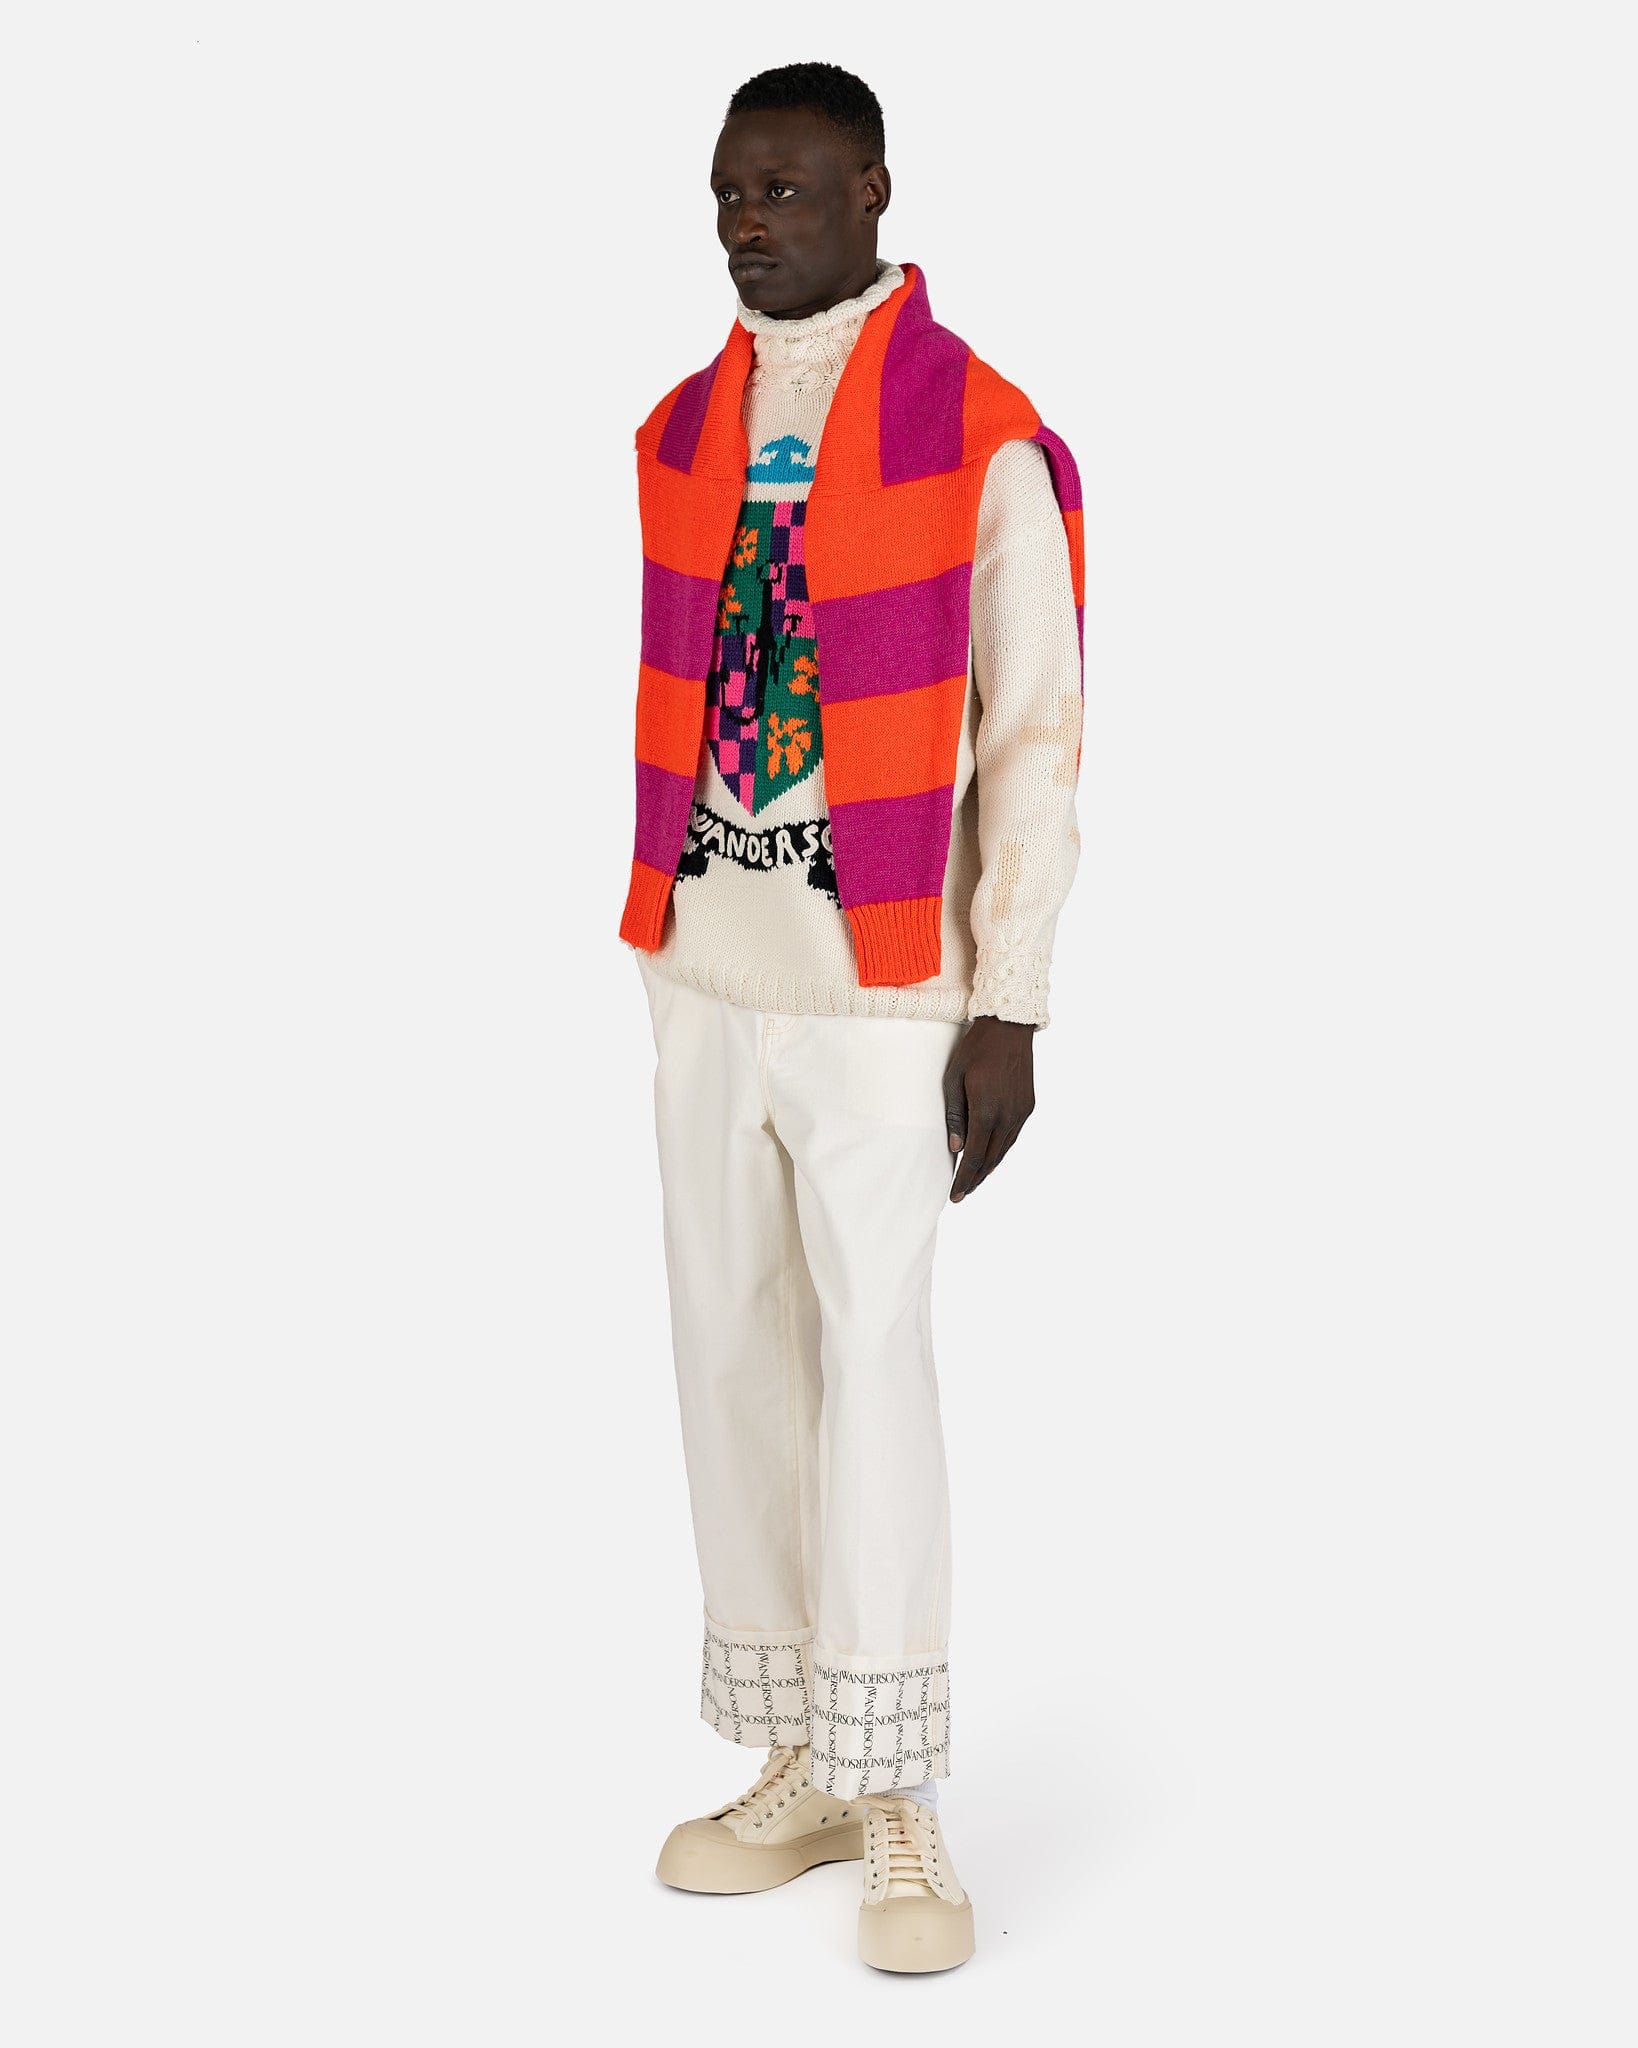 JW Anderson mens sweater Hand Knit Mock Neck Jumper in Off White